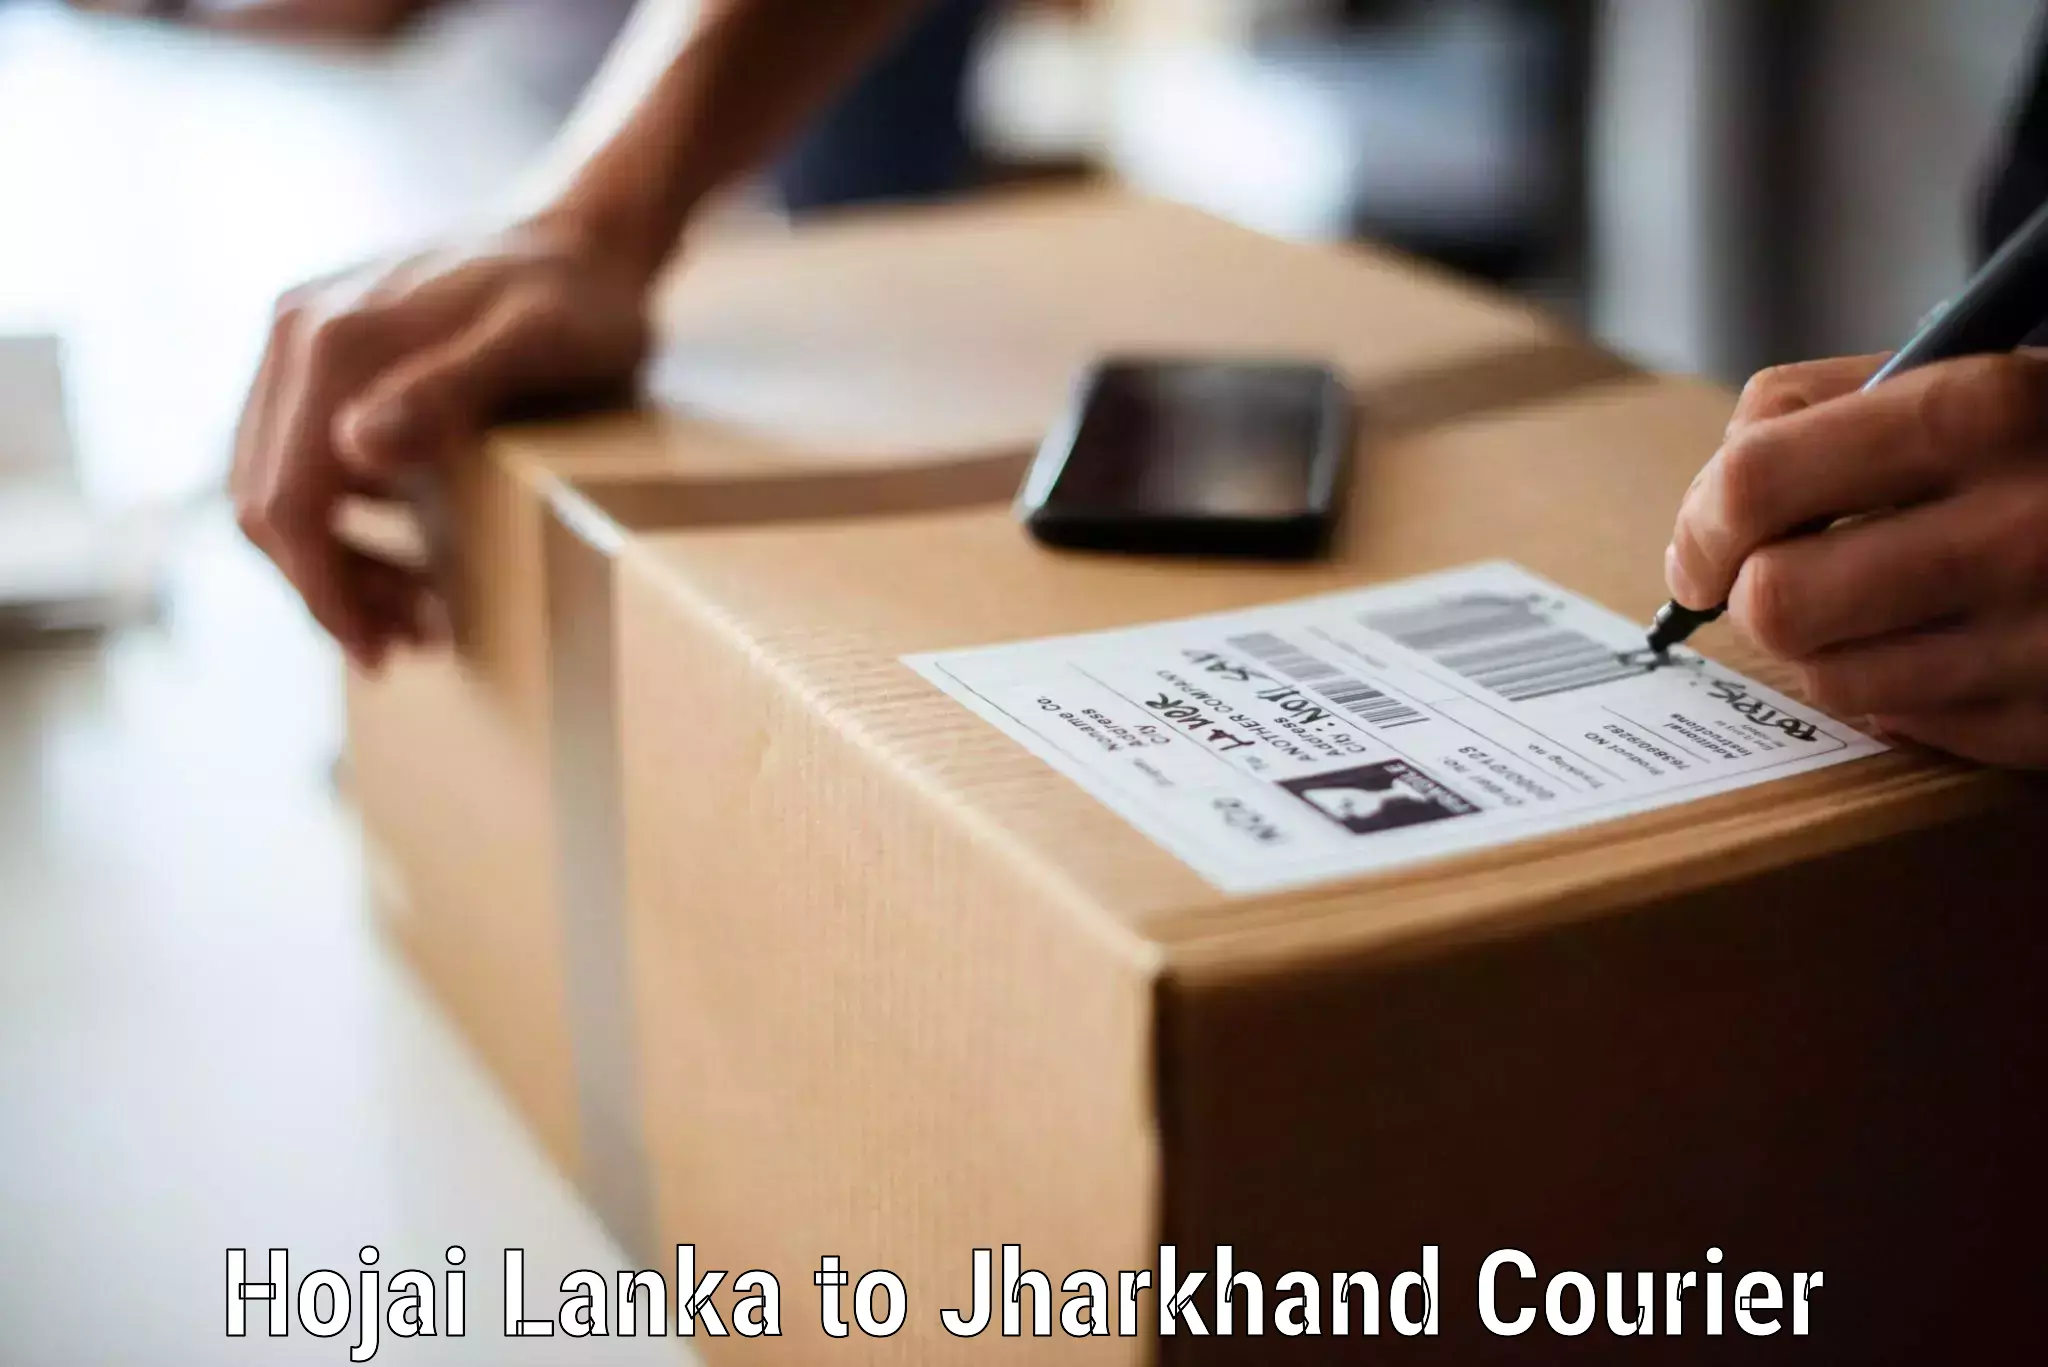 Efficient moving services Hojai Lanka to Dhanbad